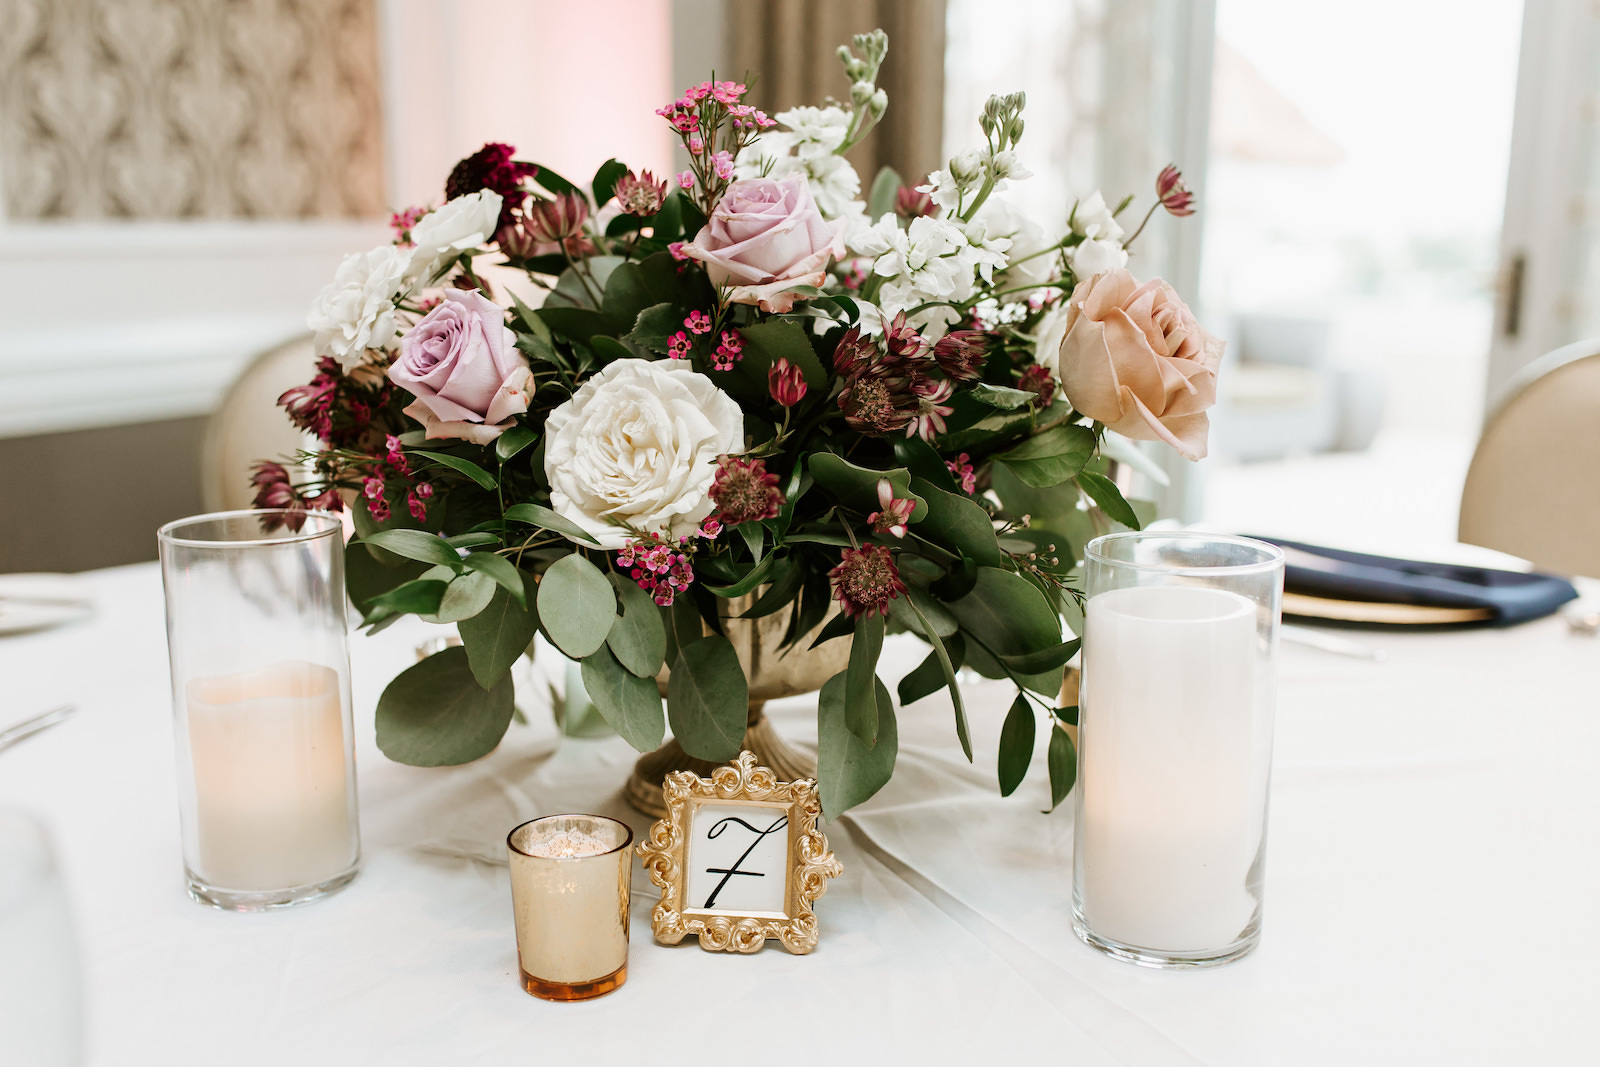 Wedding Reception Tables with Gold Chargers and Ivory Table Linens and Navy Blue Napkins | Low Gold Compote Vase Centerpiece with Loose Natural Eucalyptus Greenery and Ivory and Pink Roses and Candles | Ornate Gold Frame Table Number